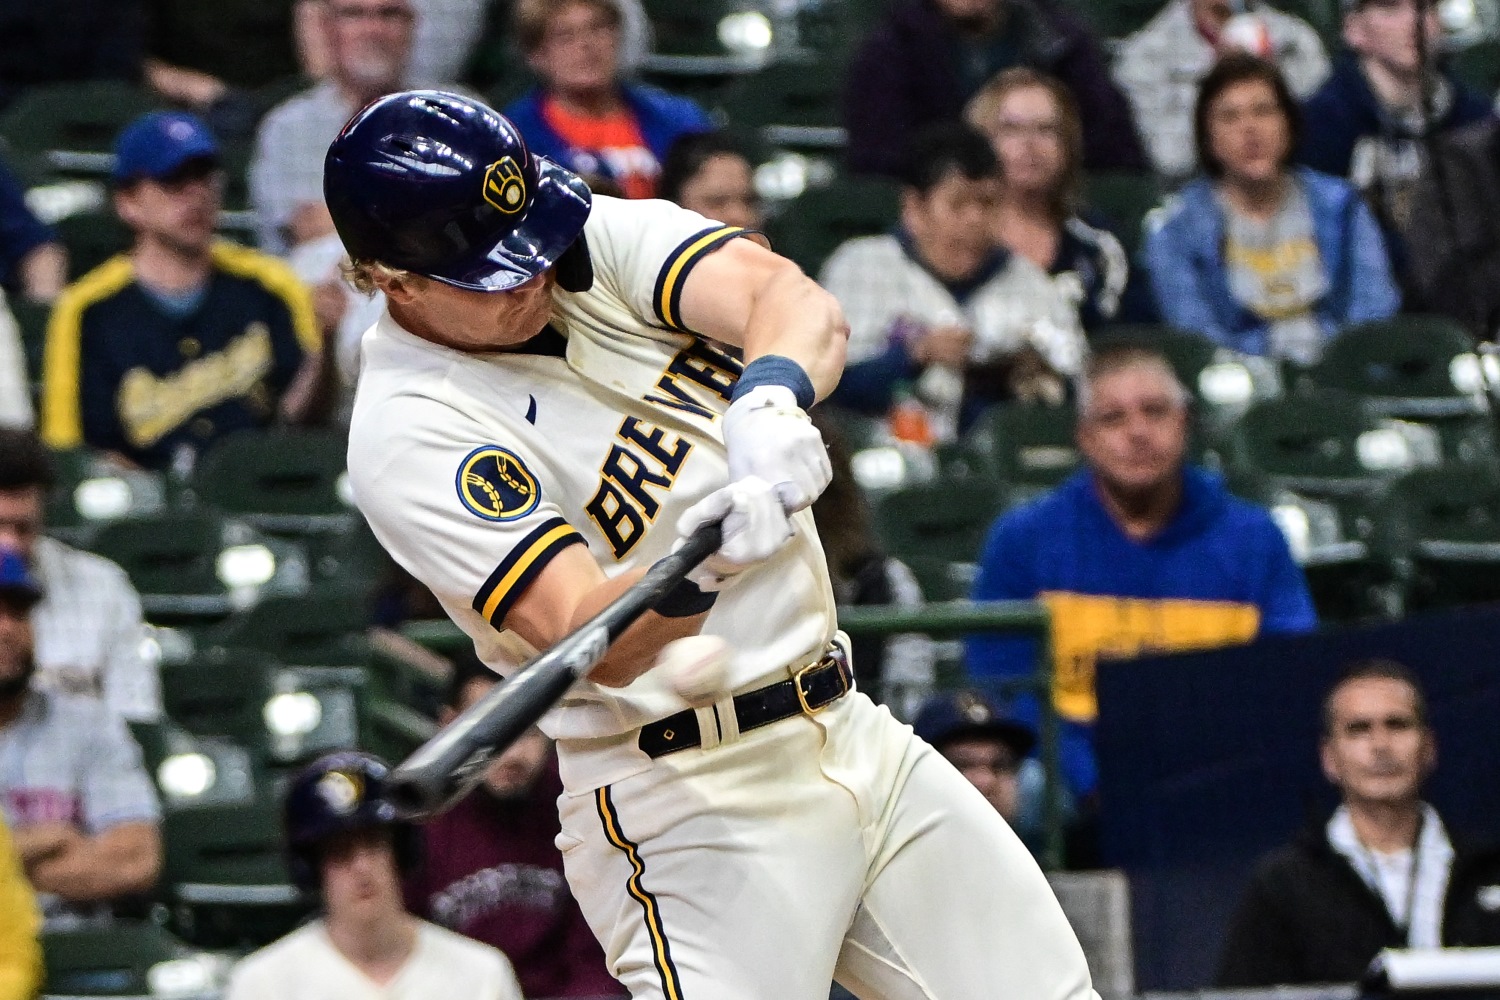 Willy Adames has Made a Change. He Needs to Make Another. - Brewers -  Brewer Fanatic